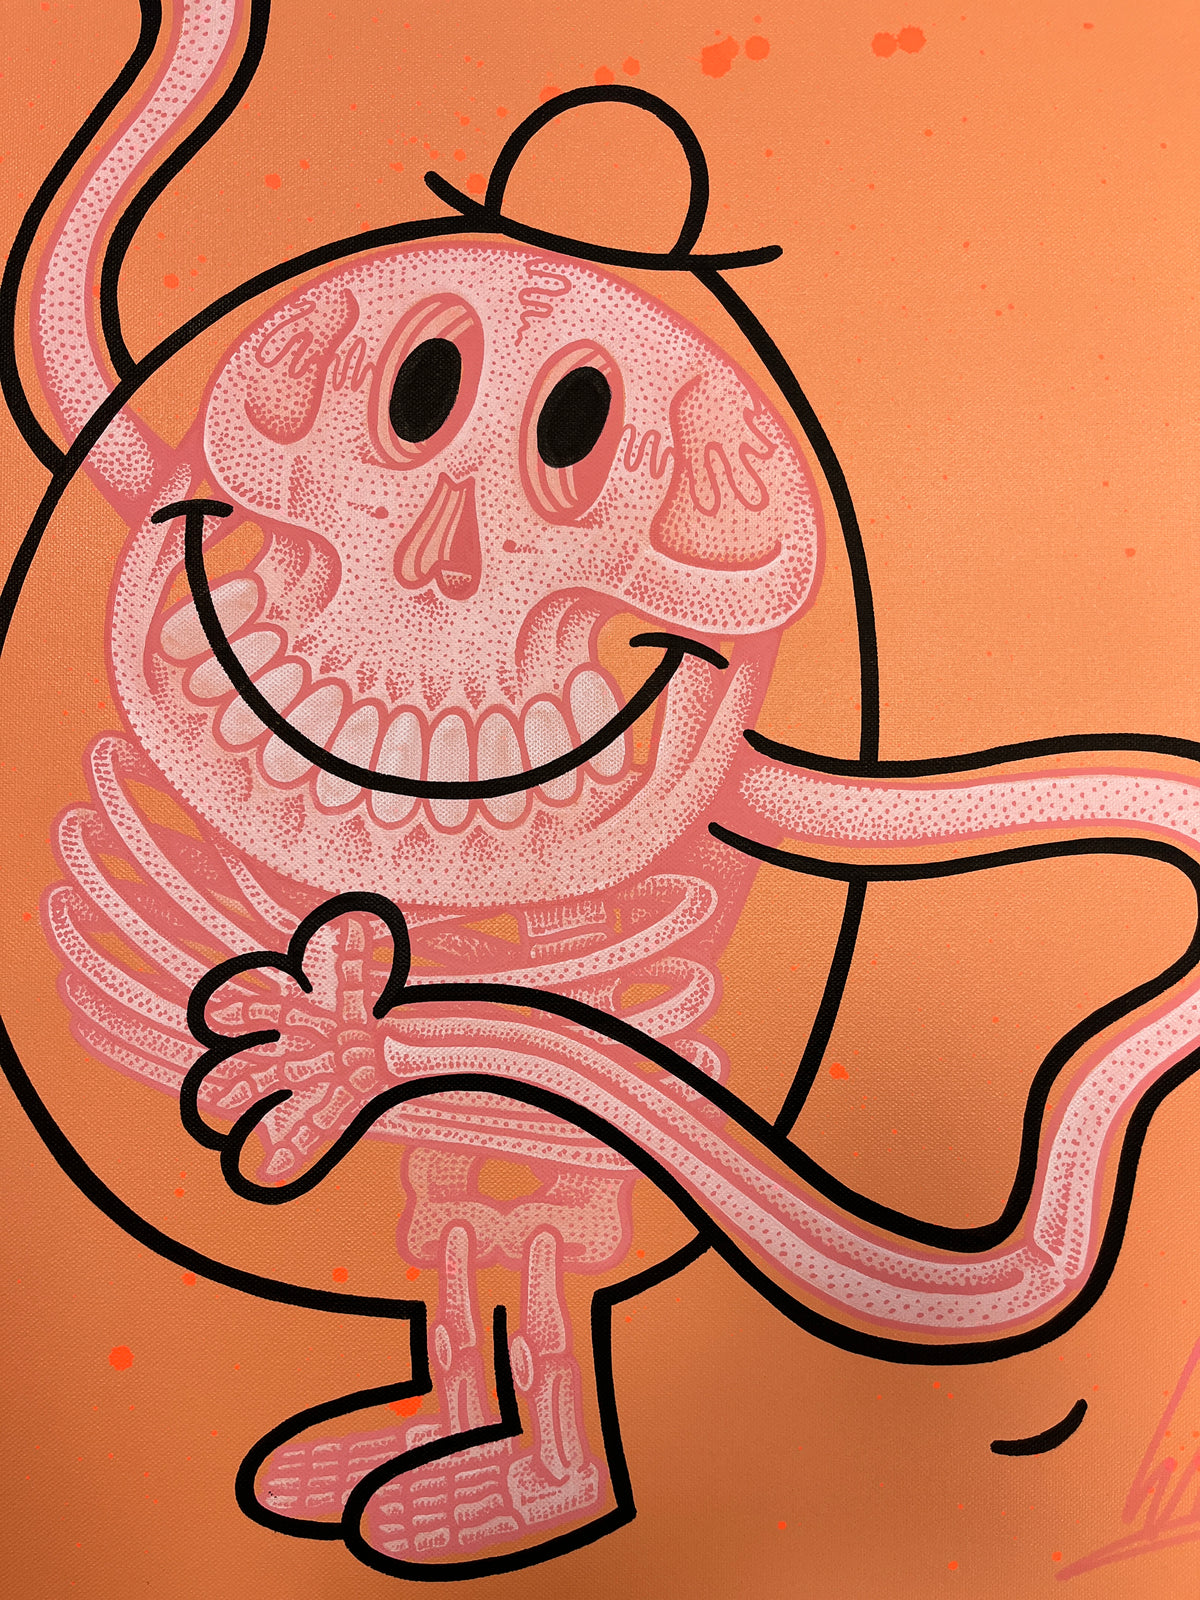 Mr Tickle by Will Blood